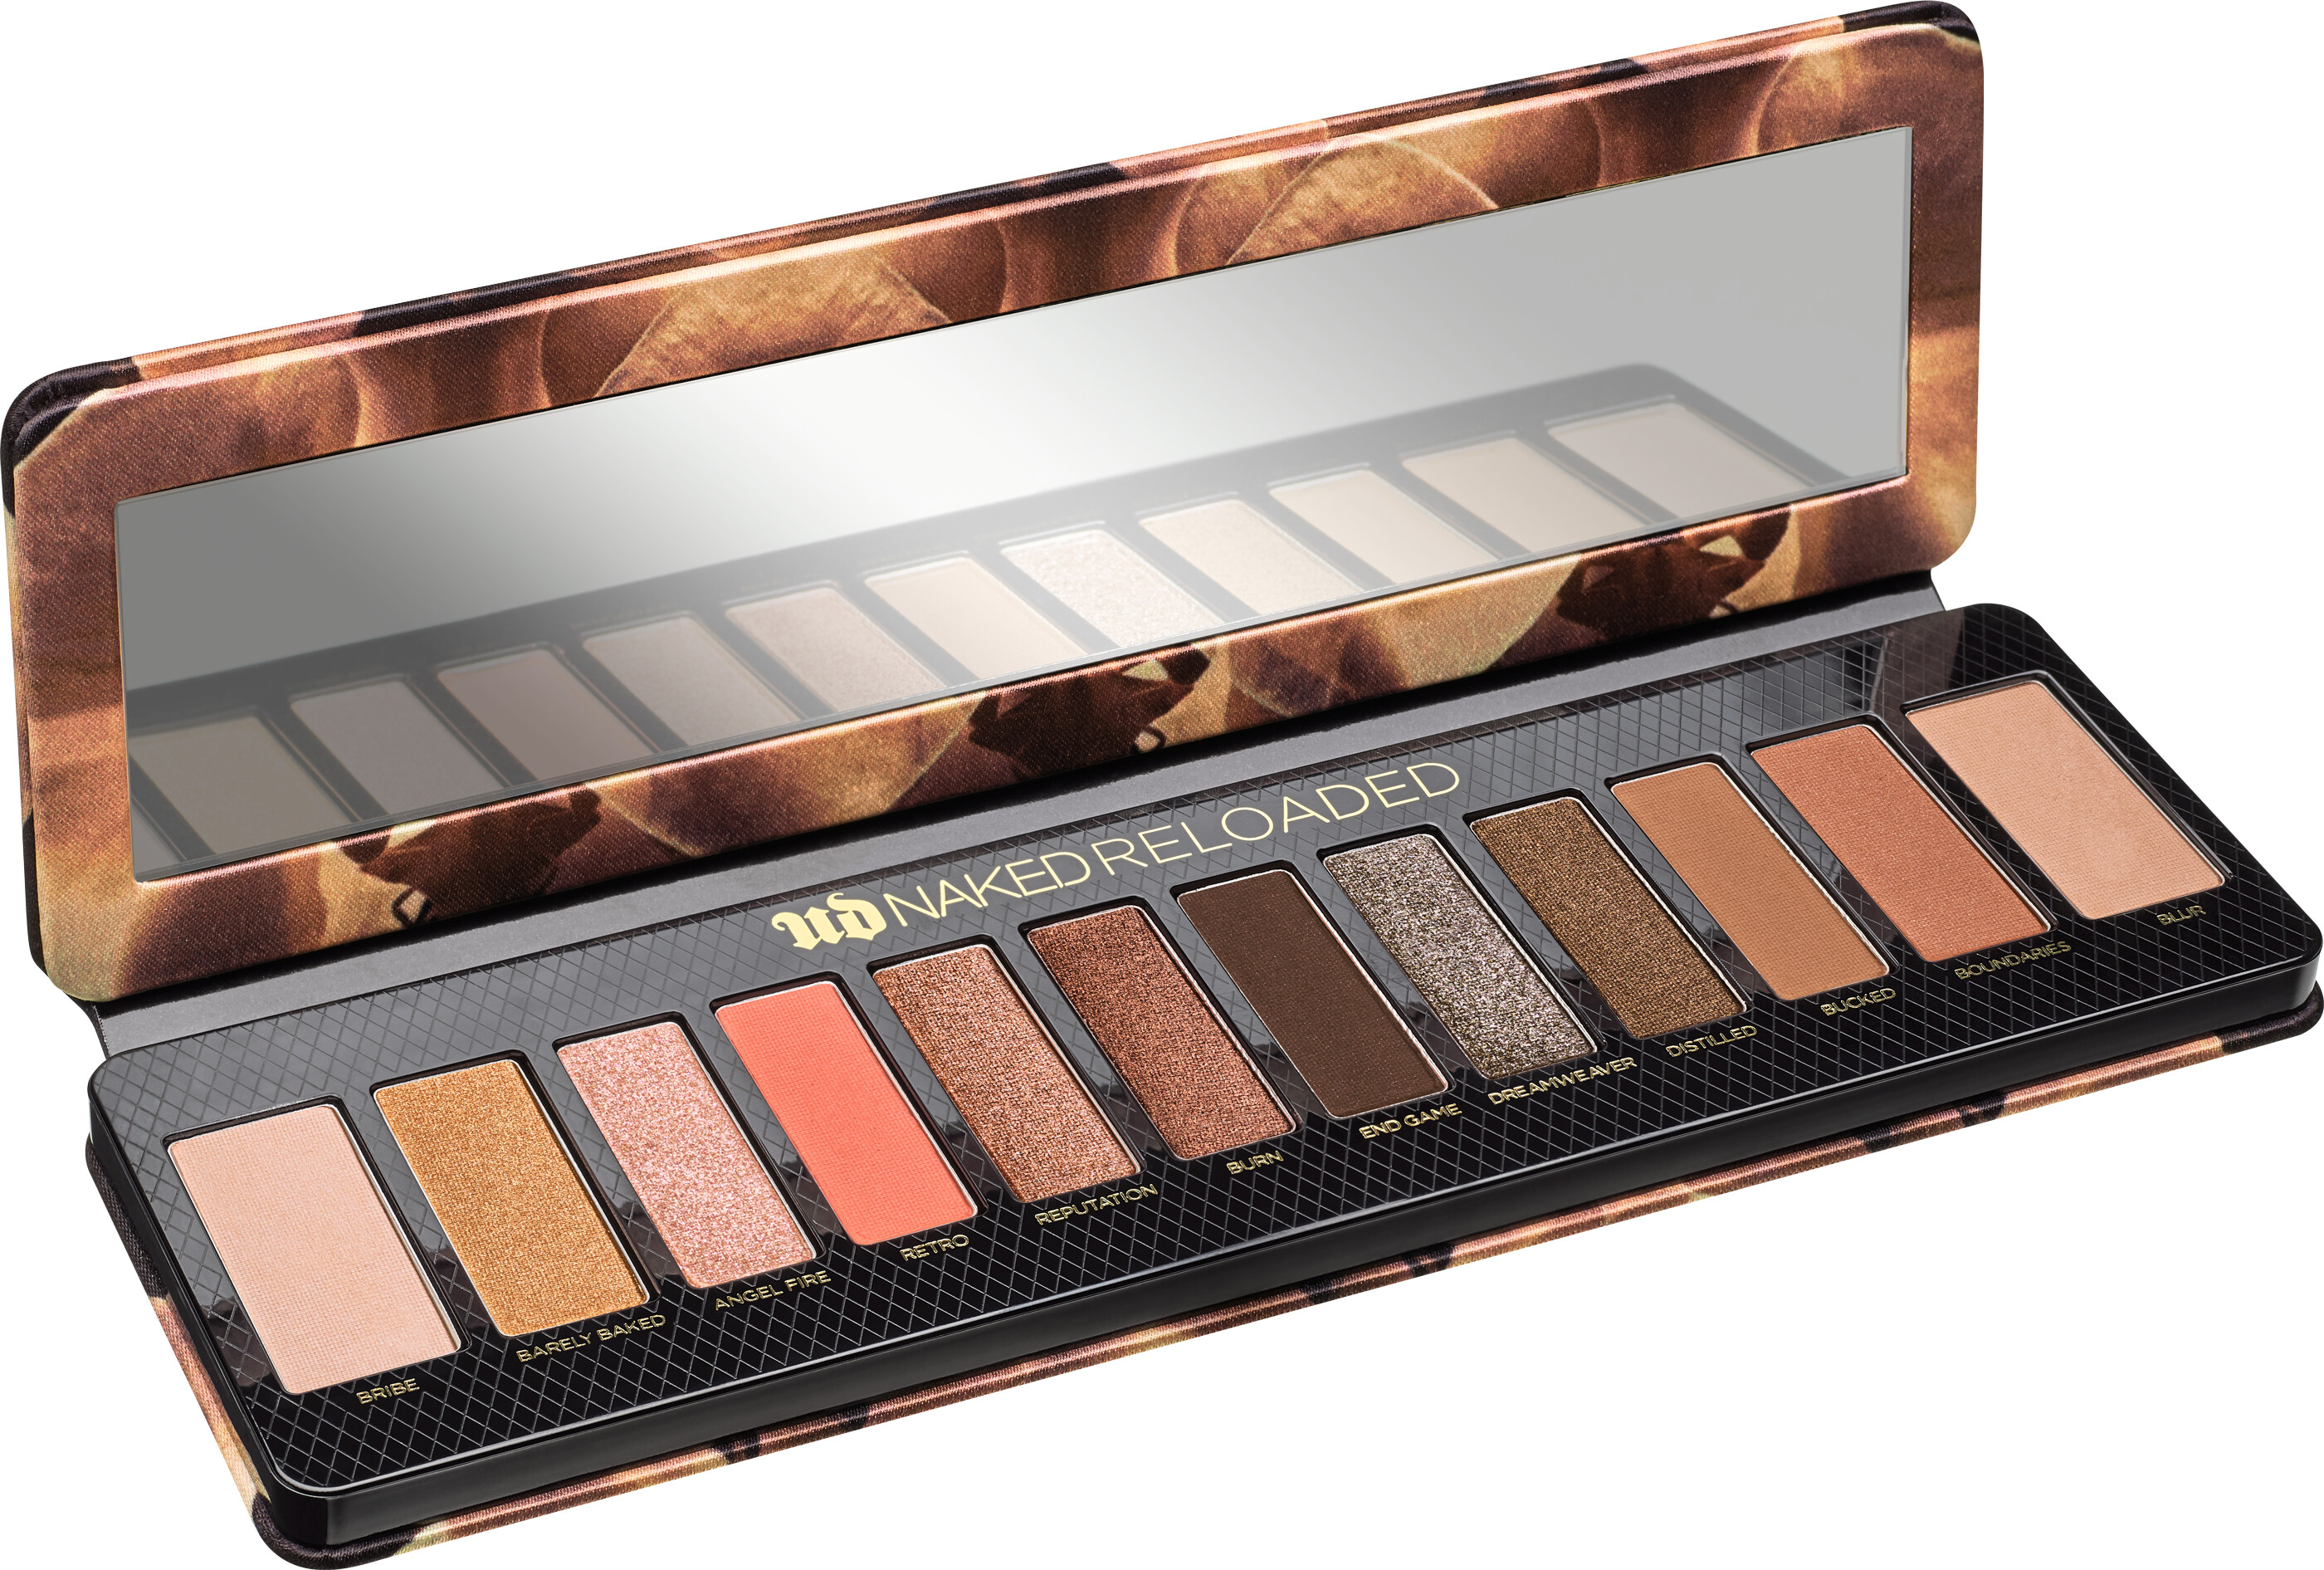 Urban Decay Naked 1 Eyeshadow Palette - beauty.bambi